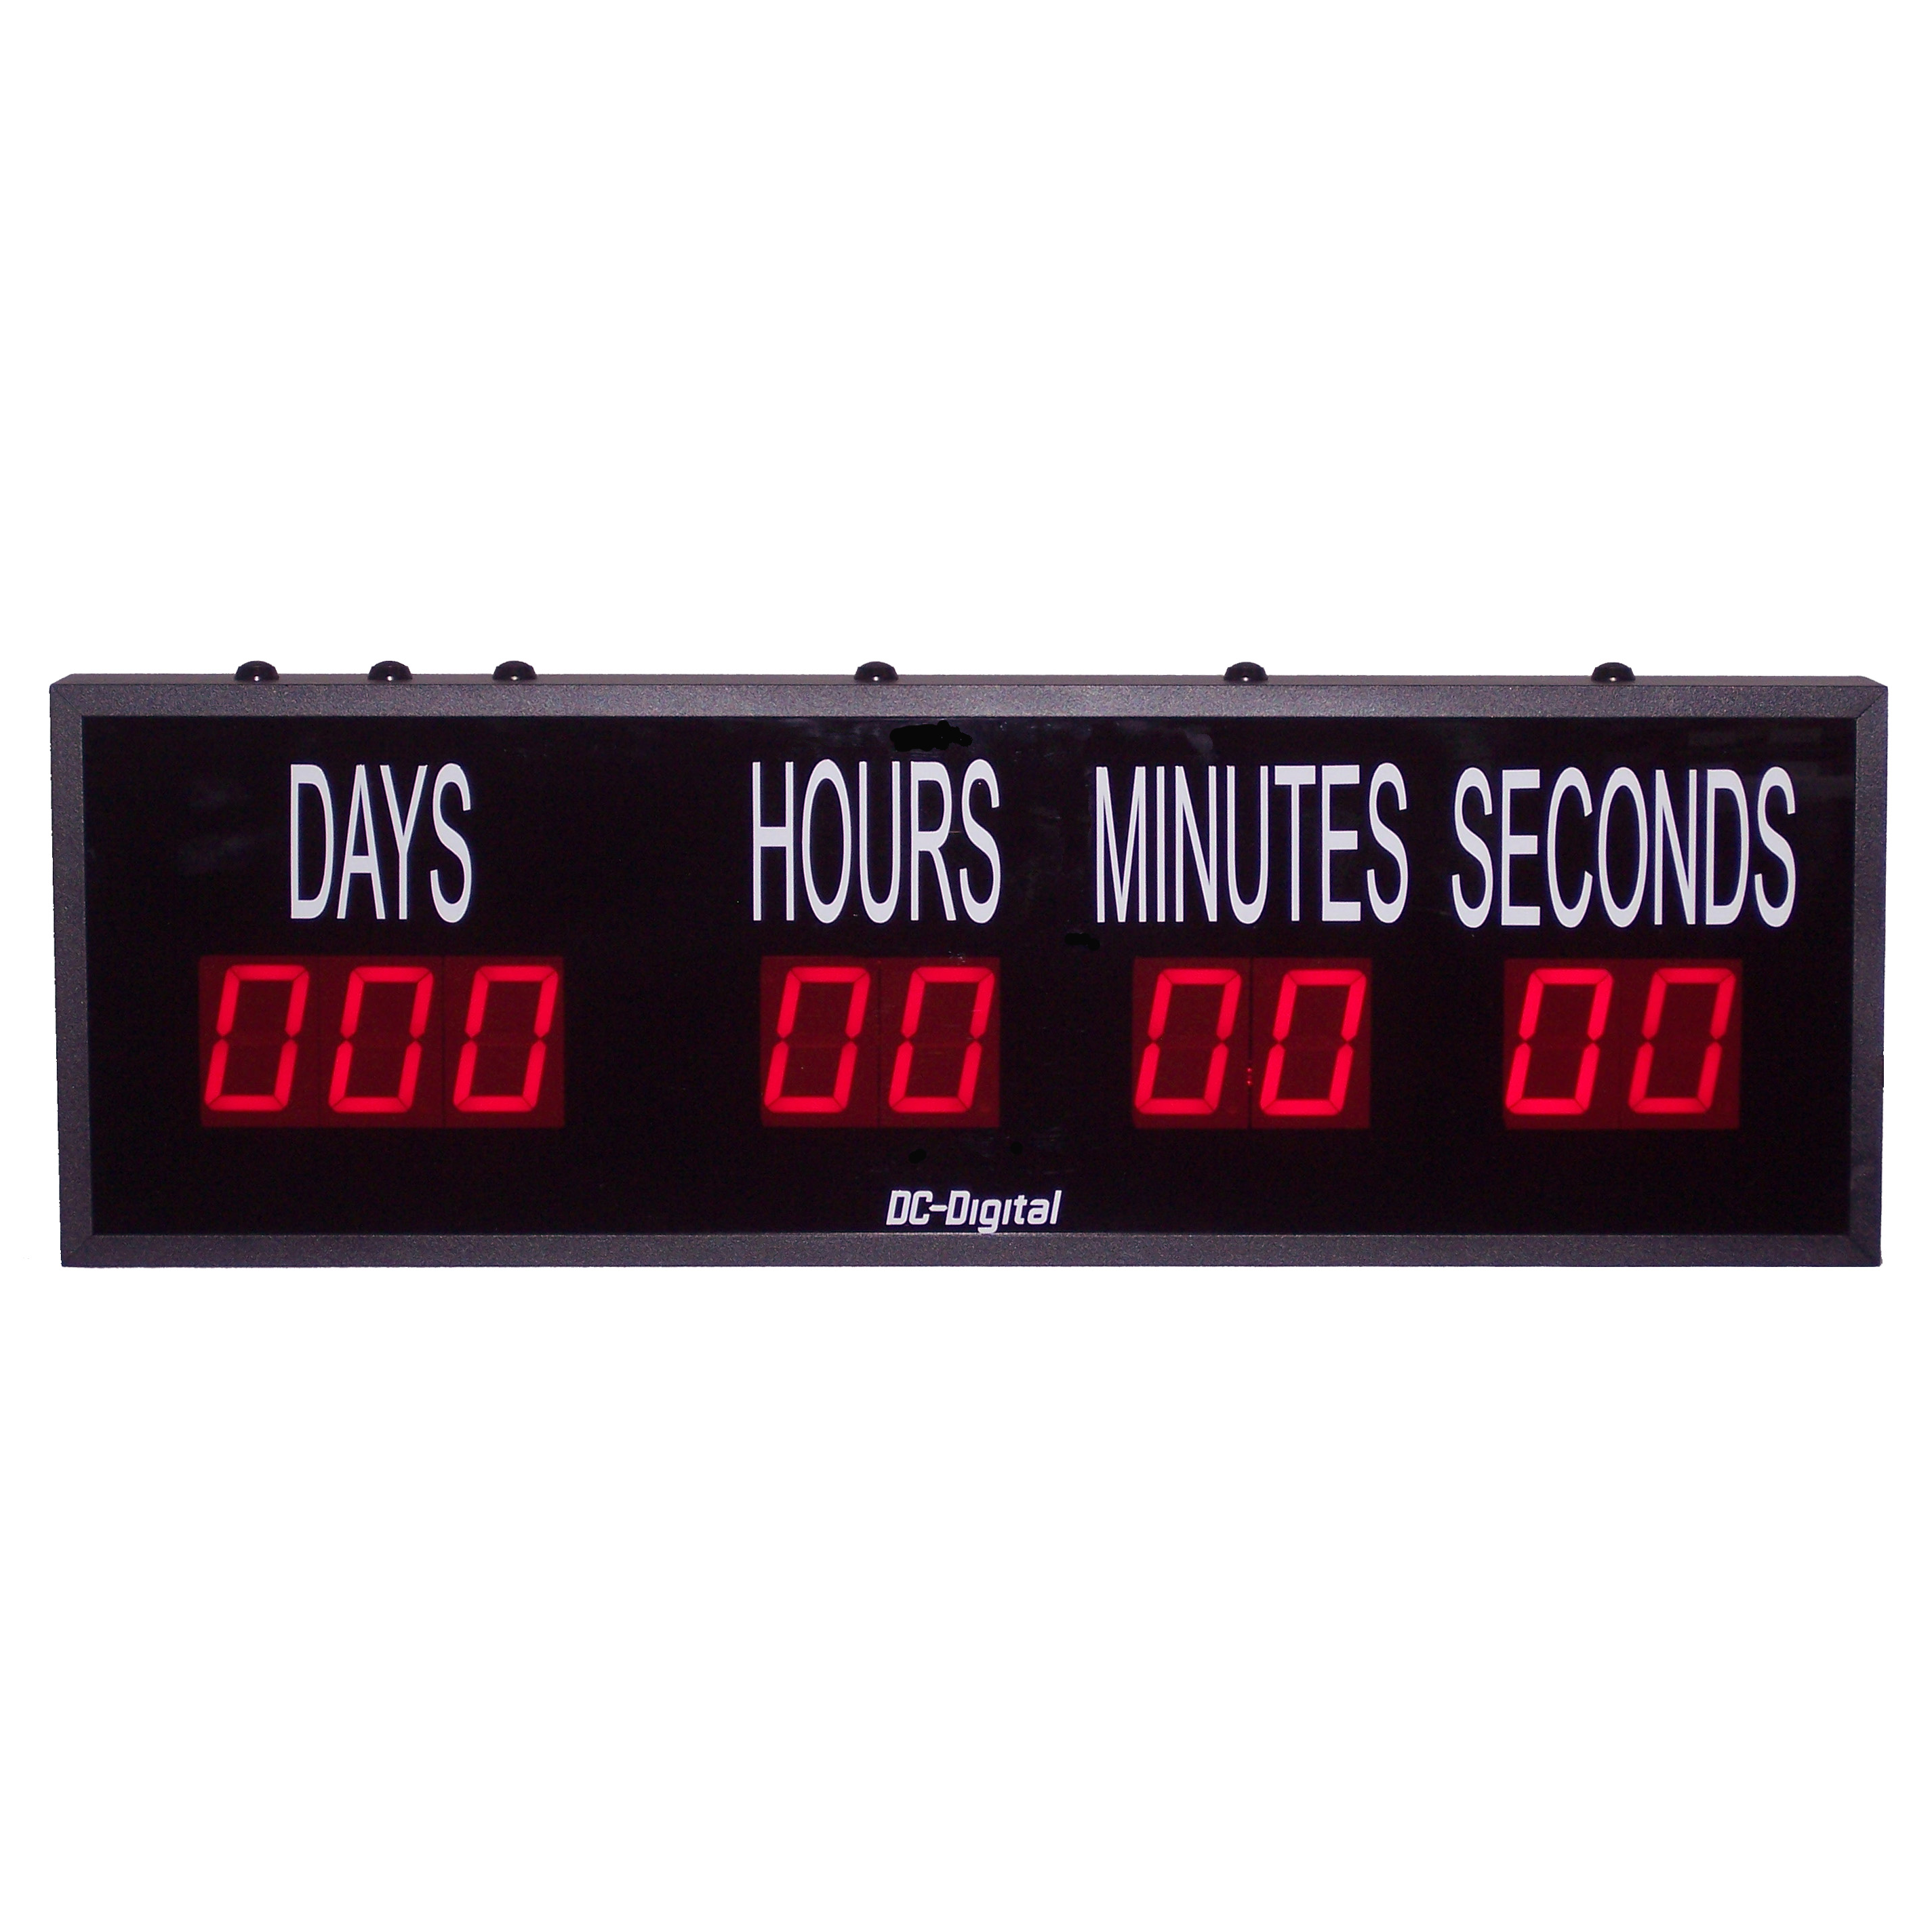 (DC-259T-DN) 2.3 Inch LED Digital, Push-Button Controlled, Countdown Timer, Days, Hours, Minutes, Seconds